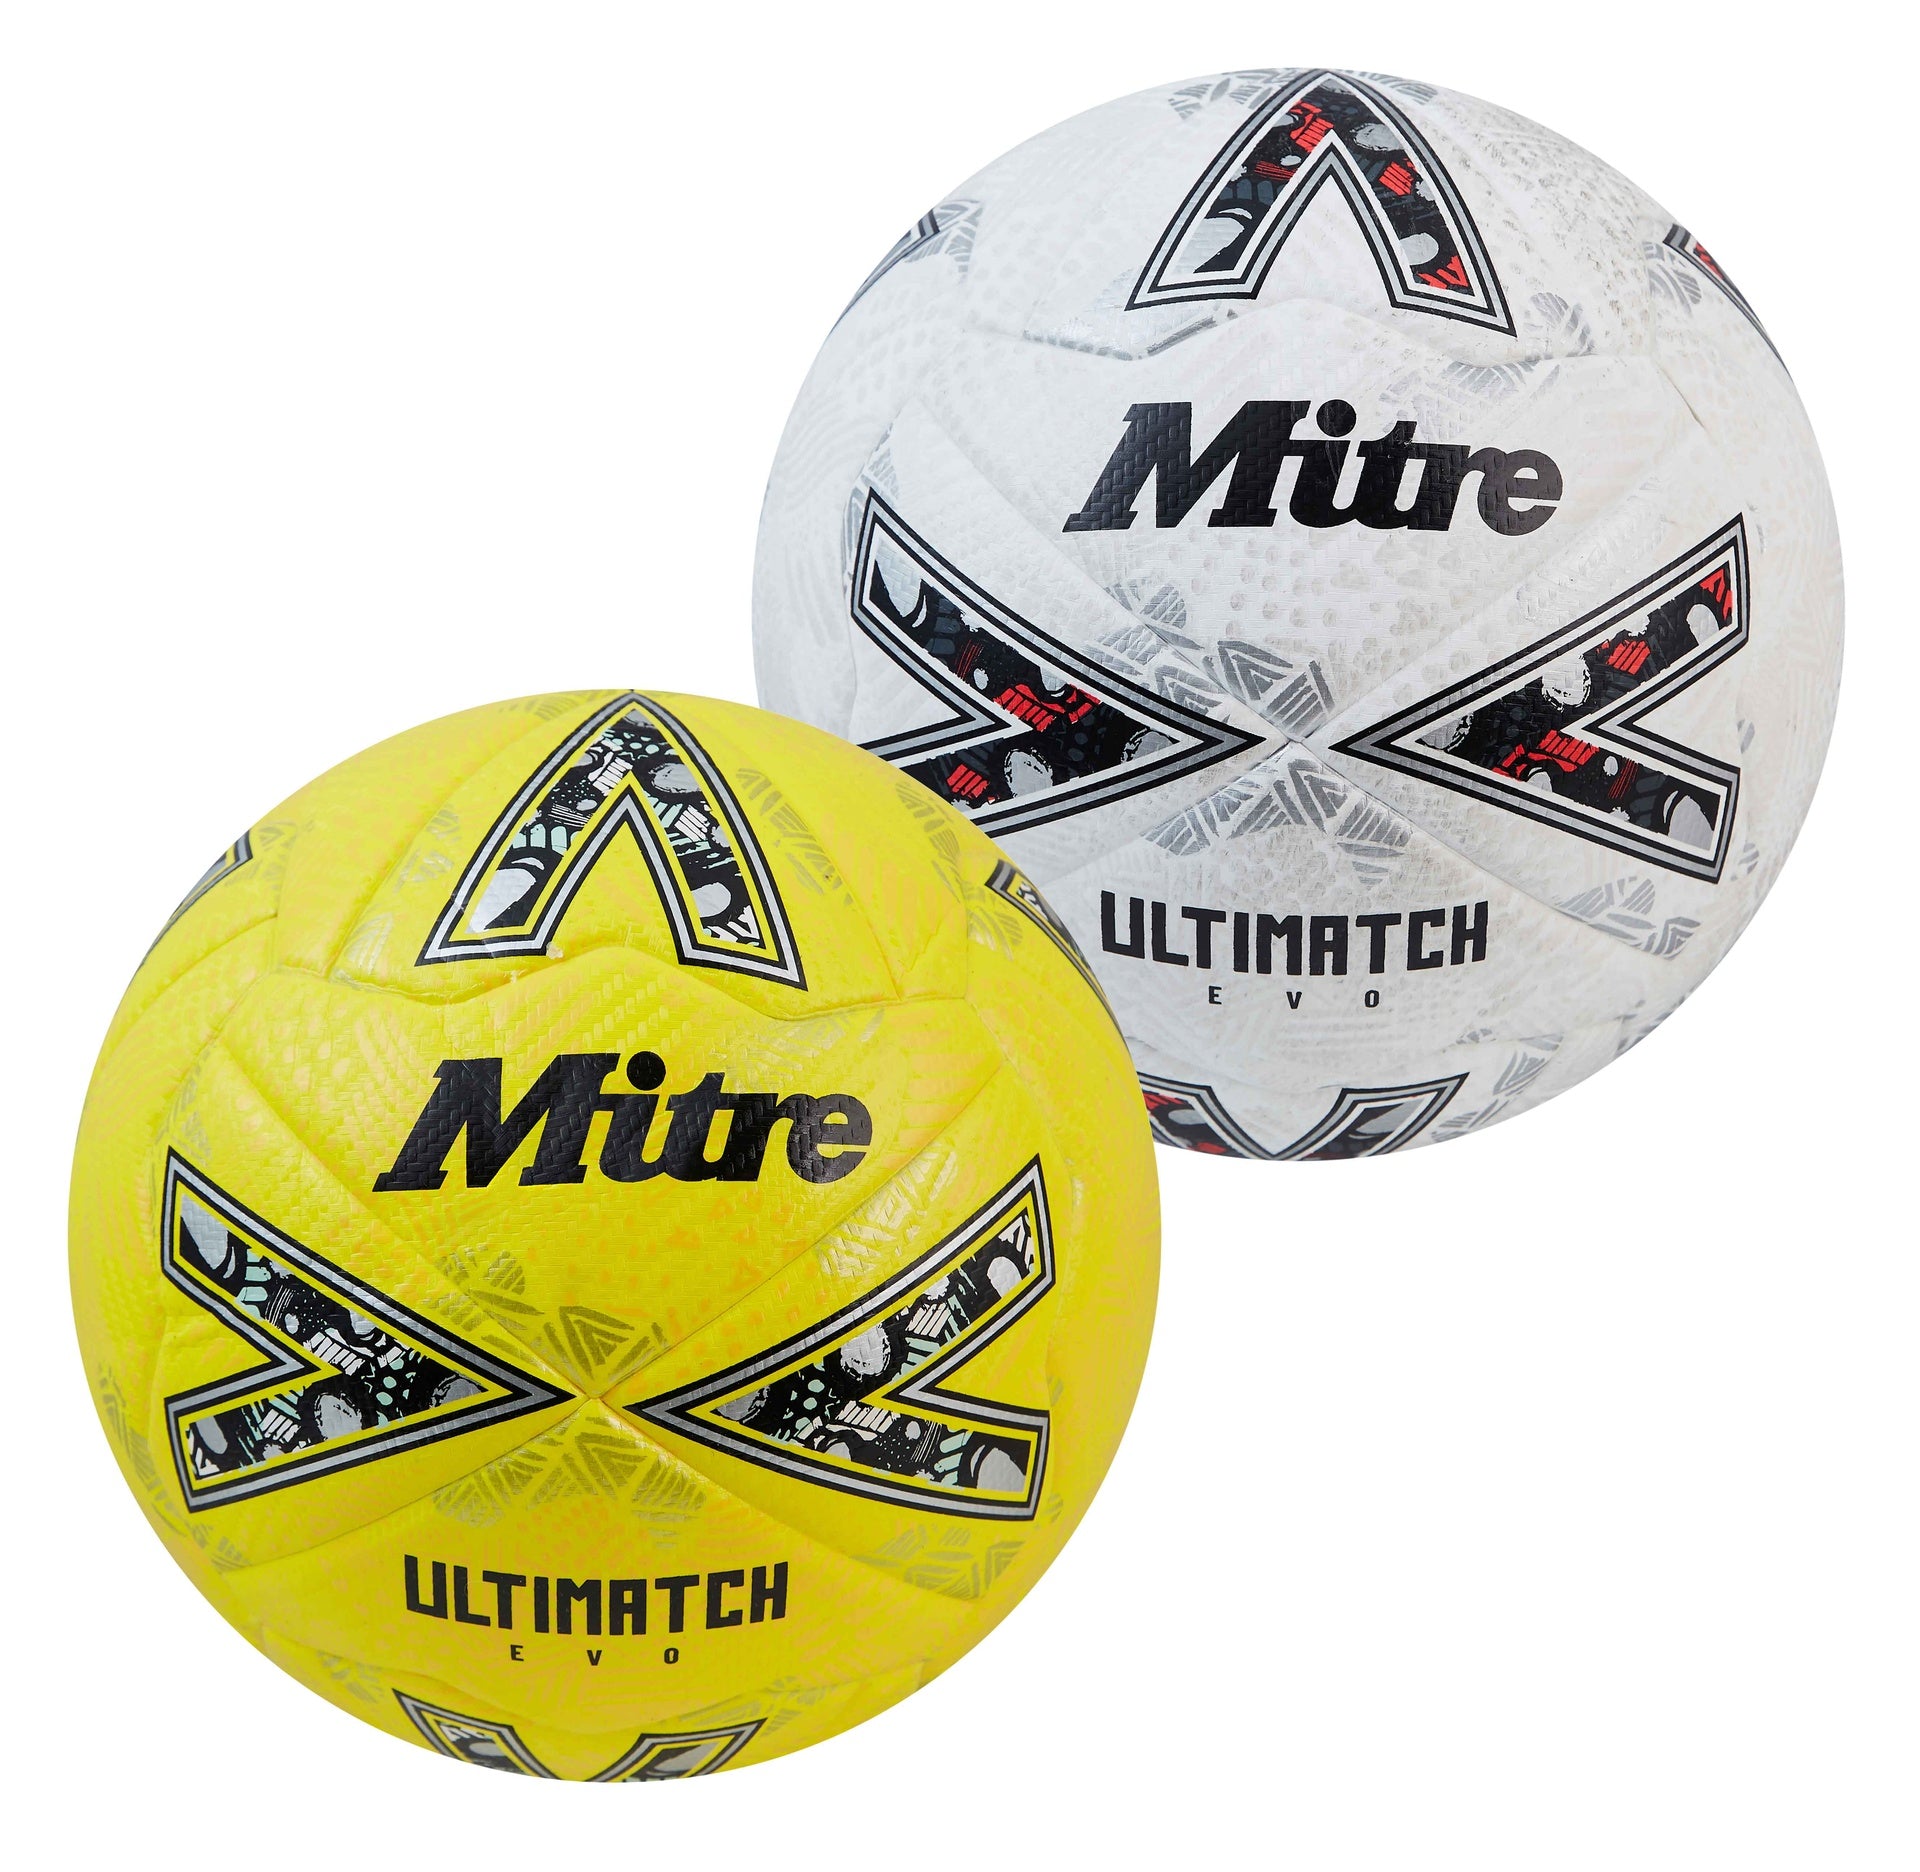 Mitre Ultimatch Evo Football - 3 - Fluo Yellow/Yellow/Gold